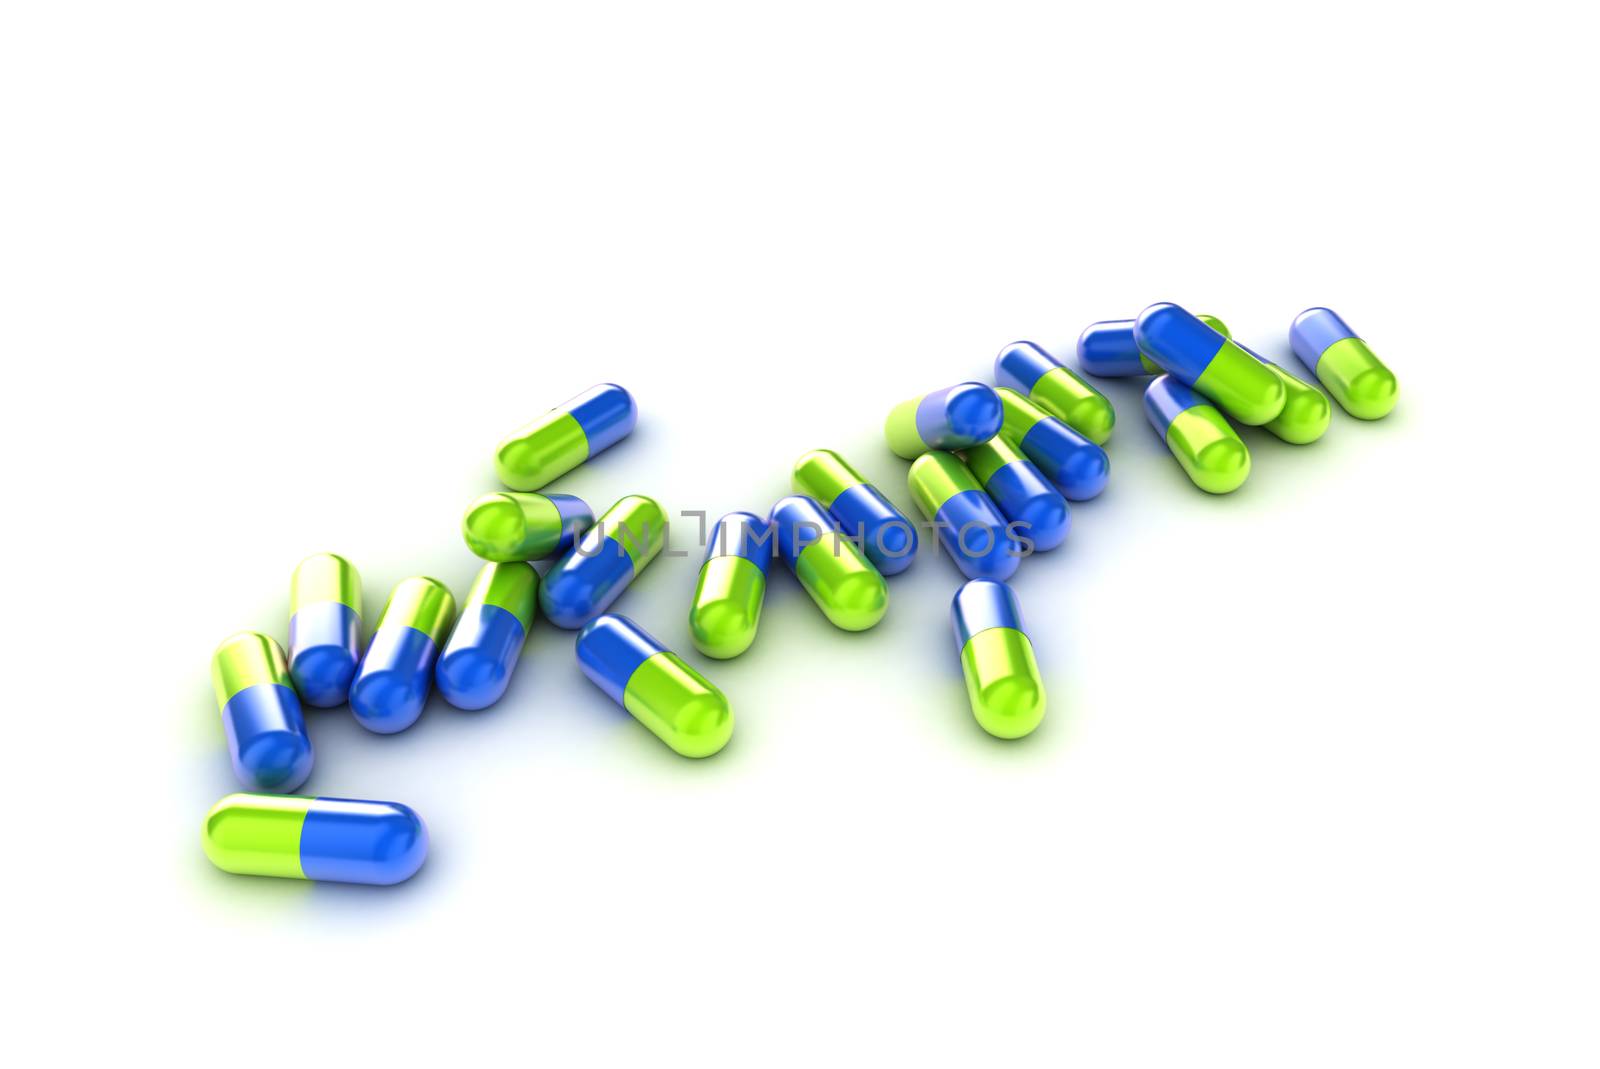 An Illustration of a Group of Green and Blue Medical Pills on a white background